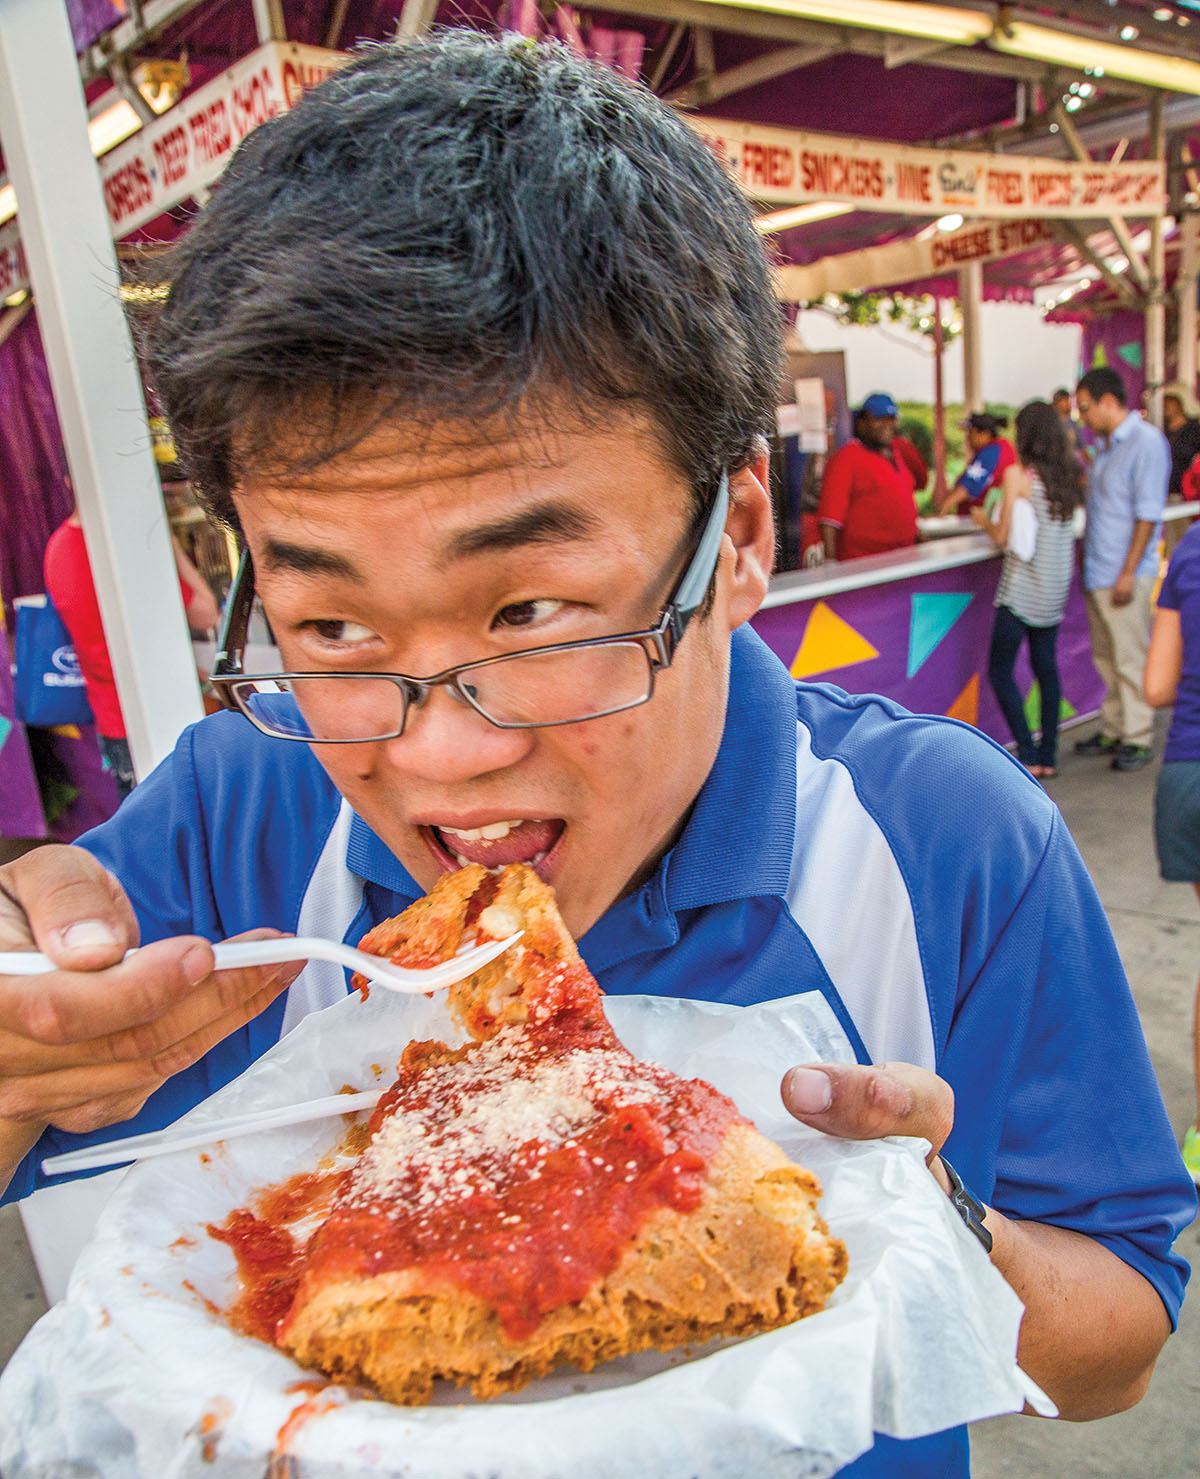 A person in a blue shirt eats a large fried item at a fair